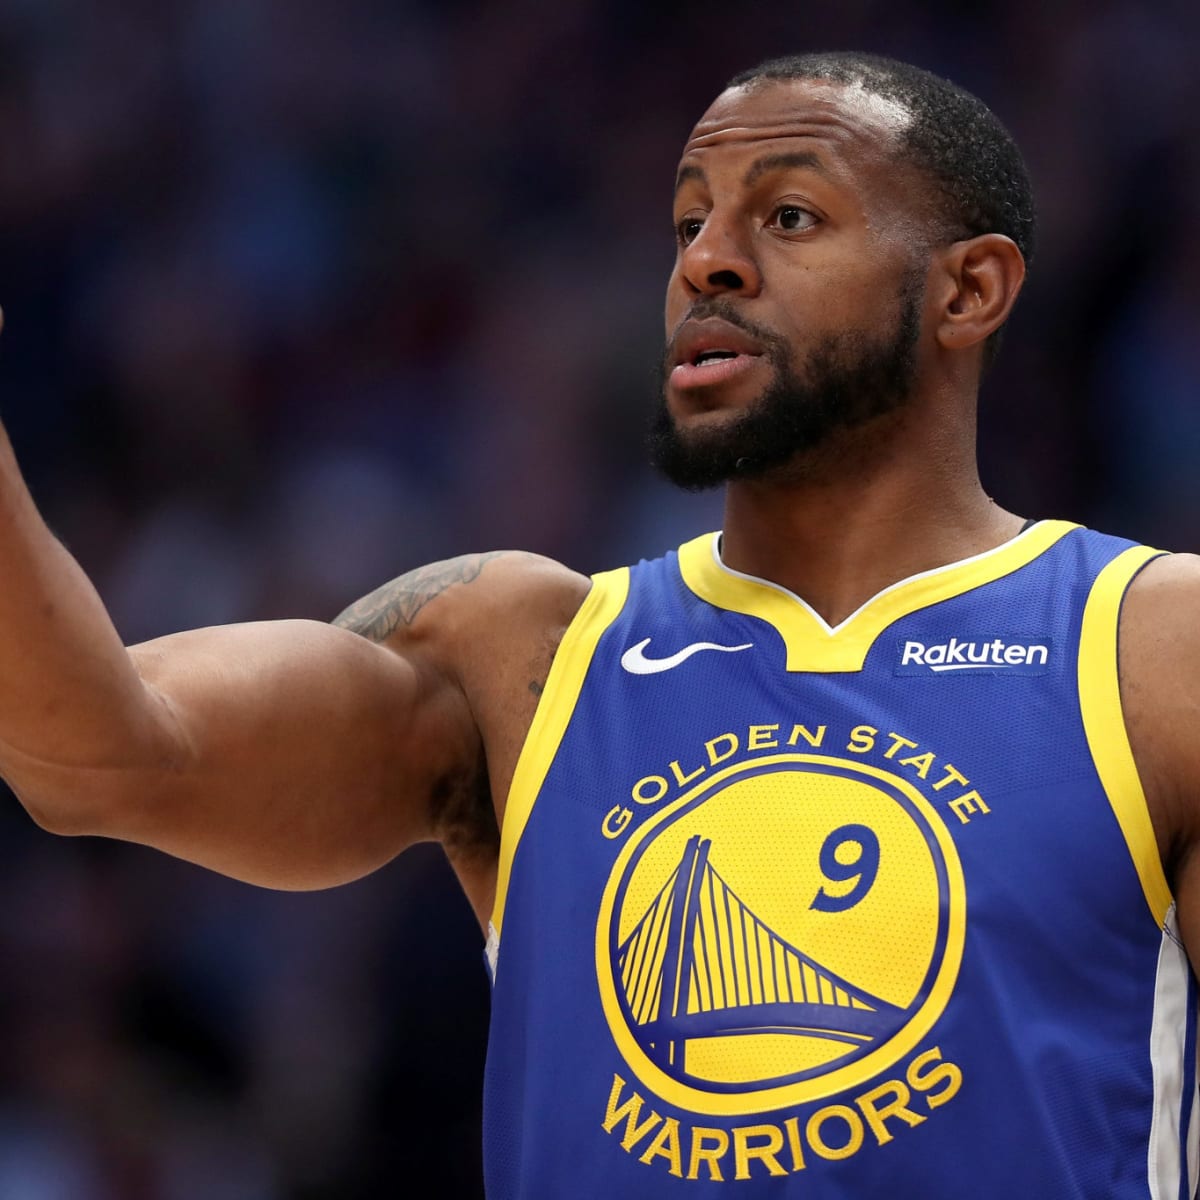 Report: Andre Iguodala reaches compromise with Grizzlies, says he 'fell out  laughing' over trade